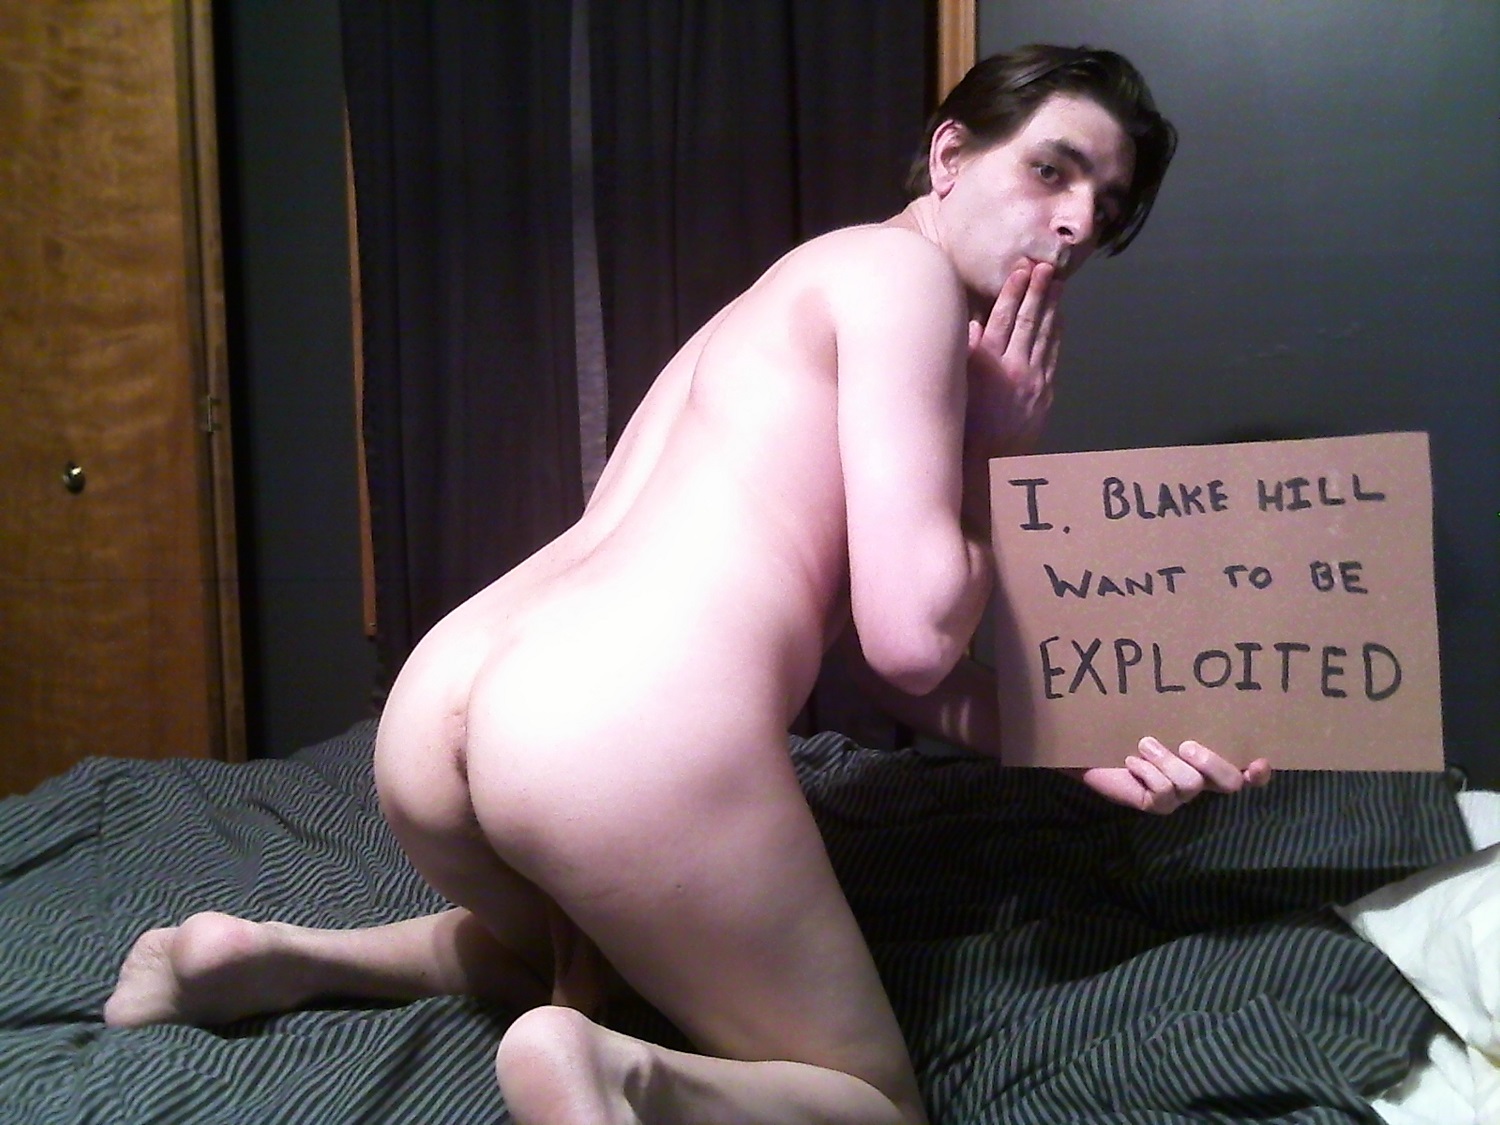 Webslut Blake Hill from Grand Rapids Michigan Exposed